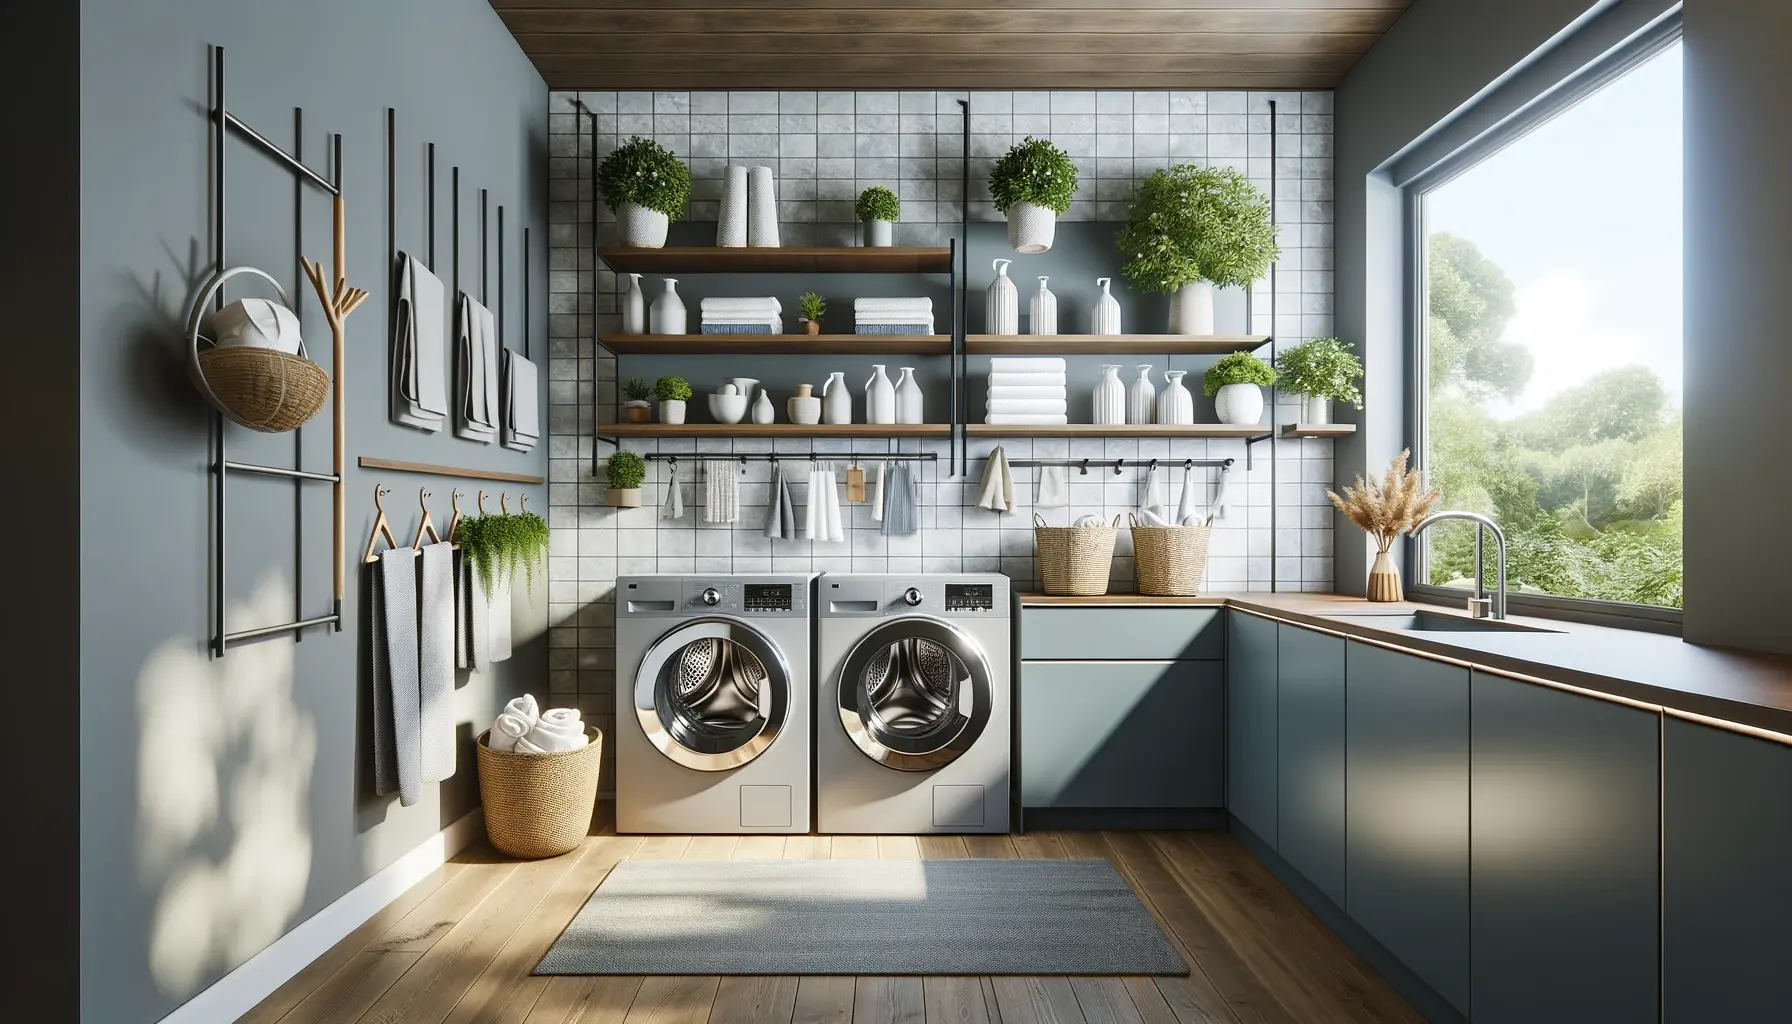 Why Does My Laundry Room Smell? Here’s How to Fix It